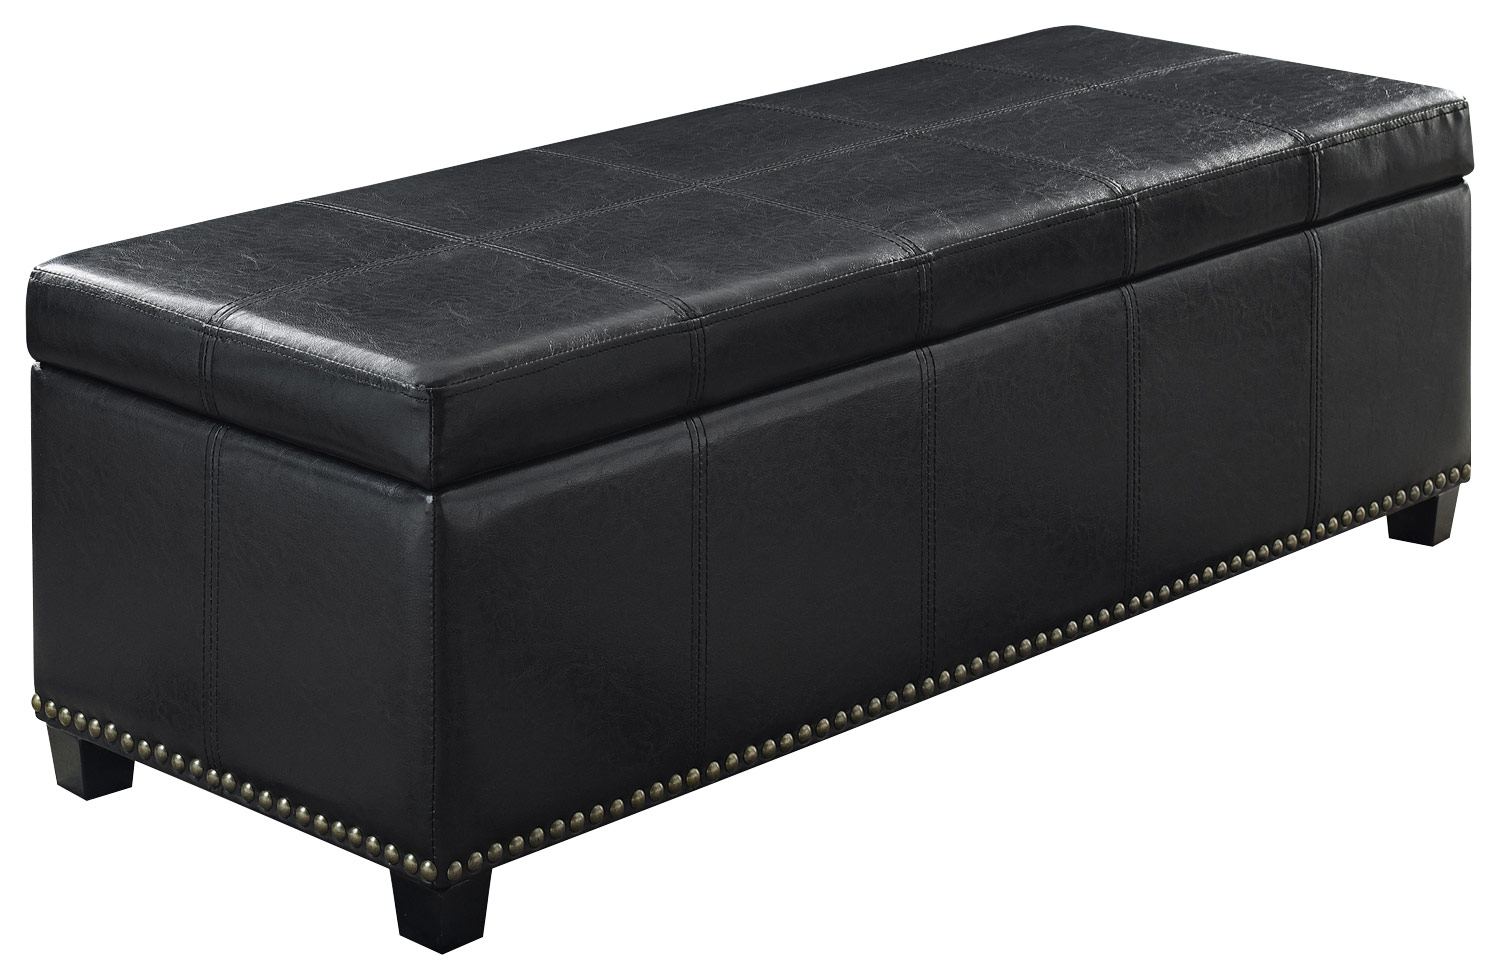 Simpli Home - Kingsley Rectangular Bonded Leather Bench Ottoman With Inner Storage - Midnight Black was $238.99 now $167.99 (30.0% off)